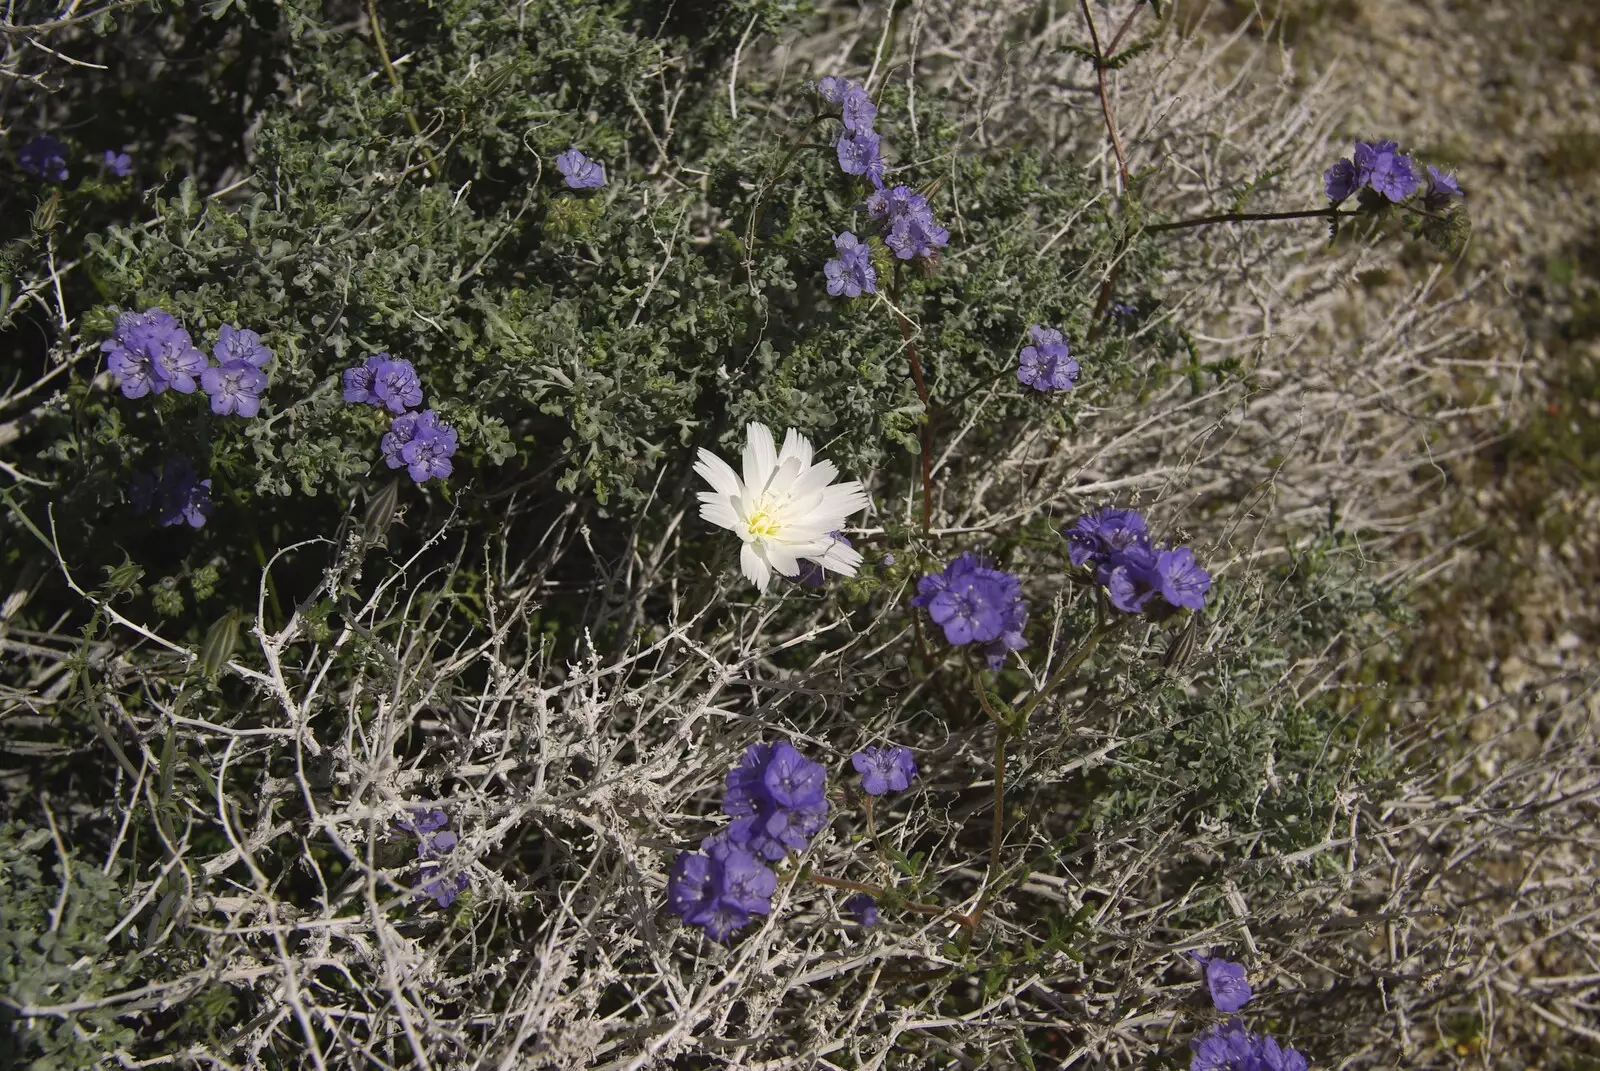 A white desert flower, surrounded by purple, from The End of the World: Julian to the Salton Sea and Back, California, US - 1st March 2008